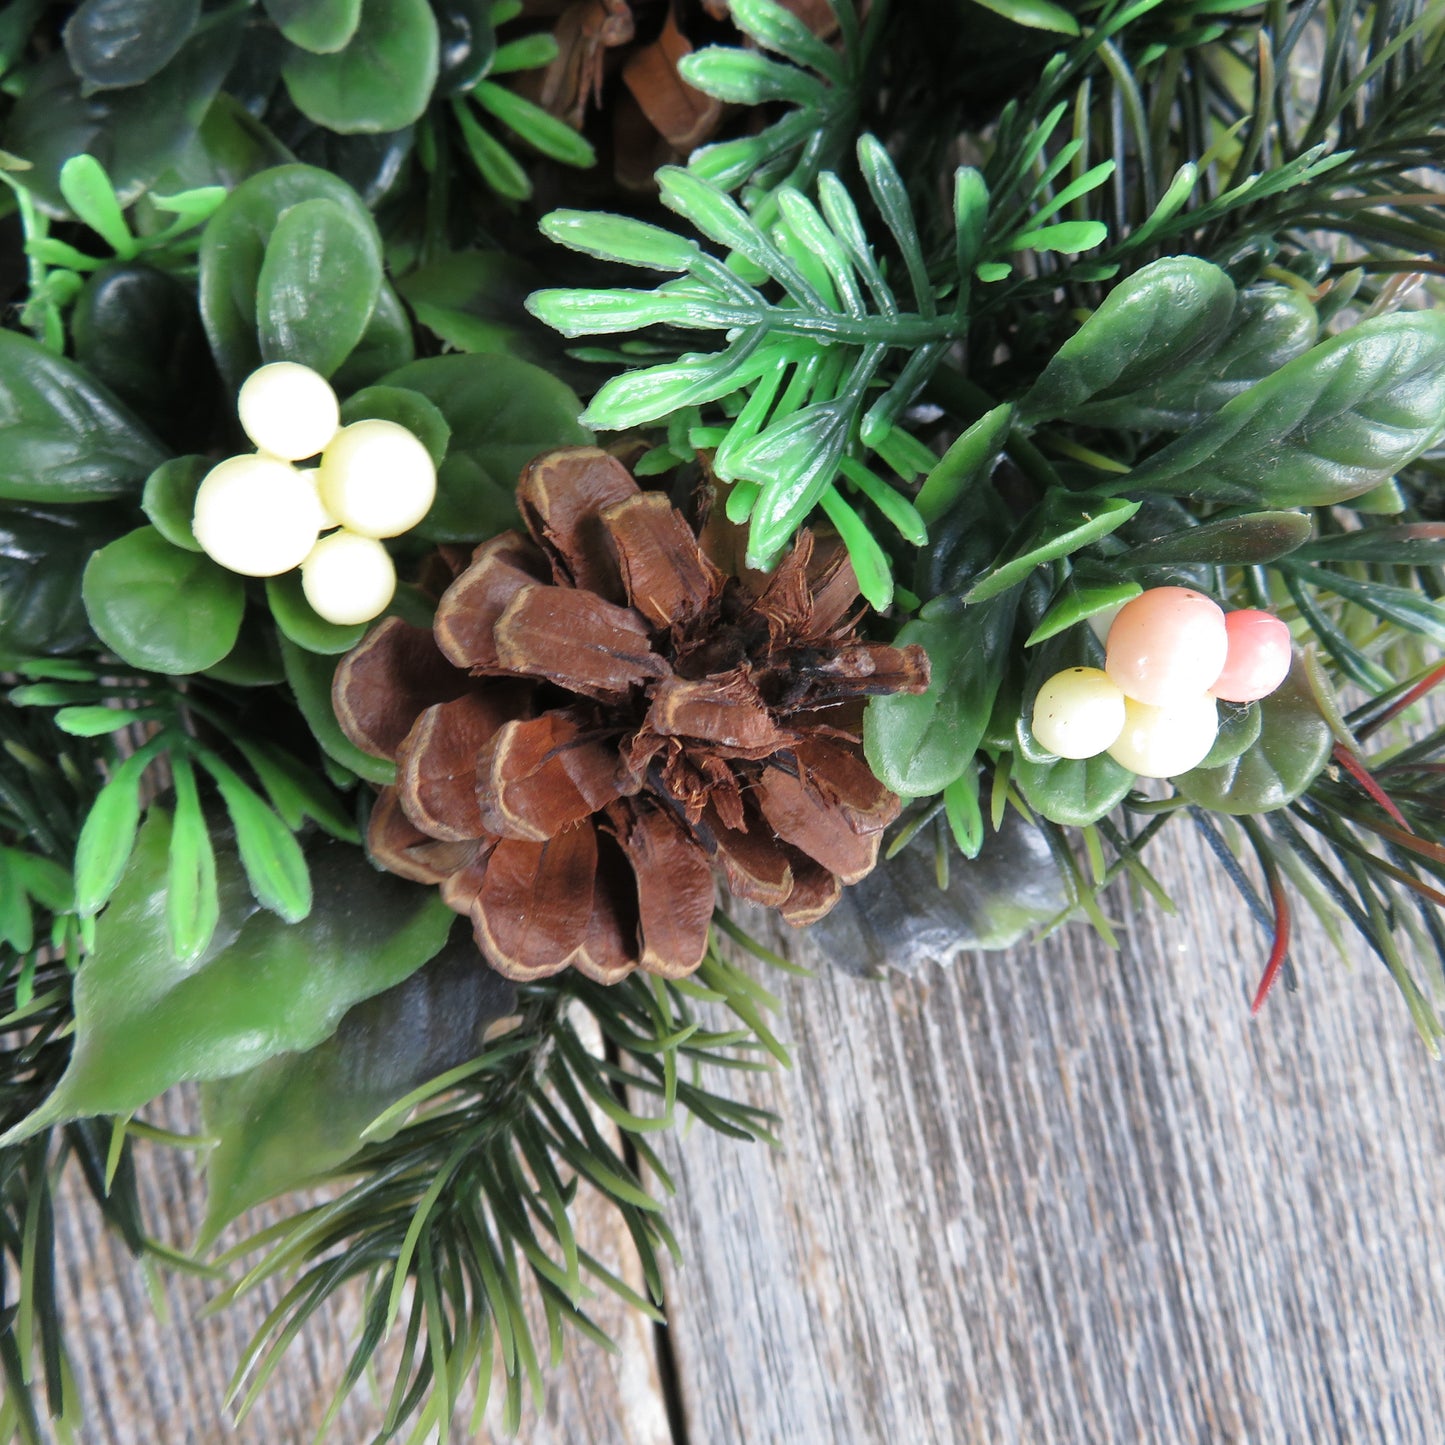 Vintage Greenery Candle Wreath Garland Christmas Plastic Holly Fir Pine Cone Berries Centerpiece